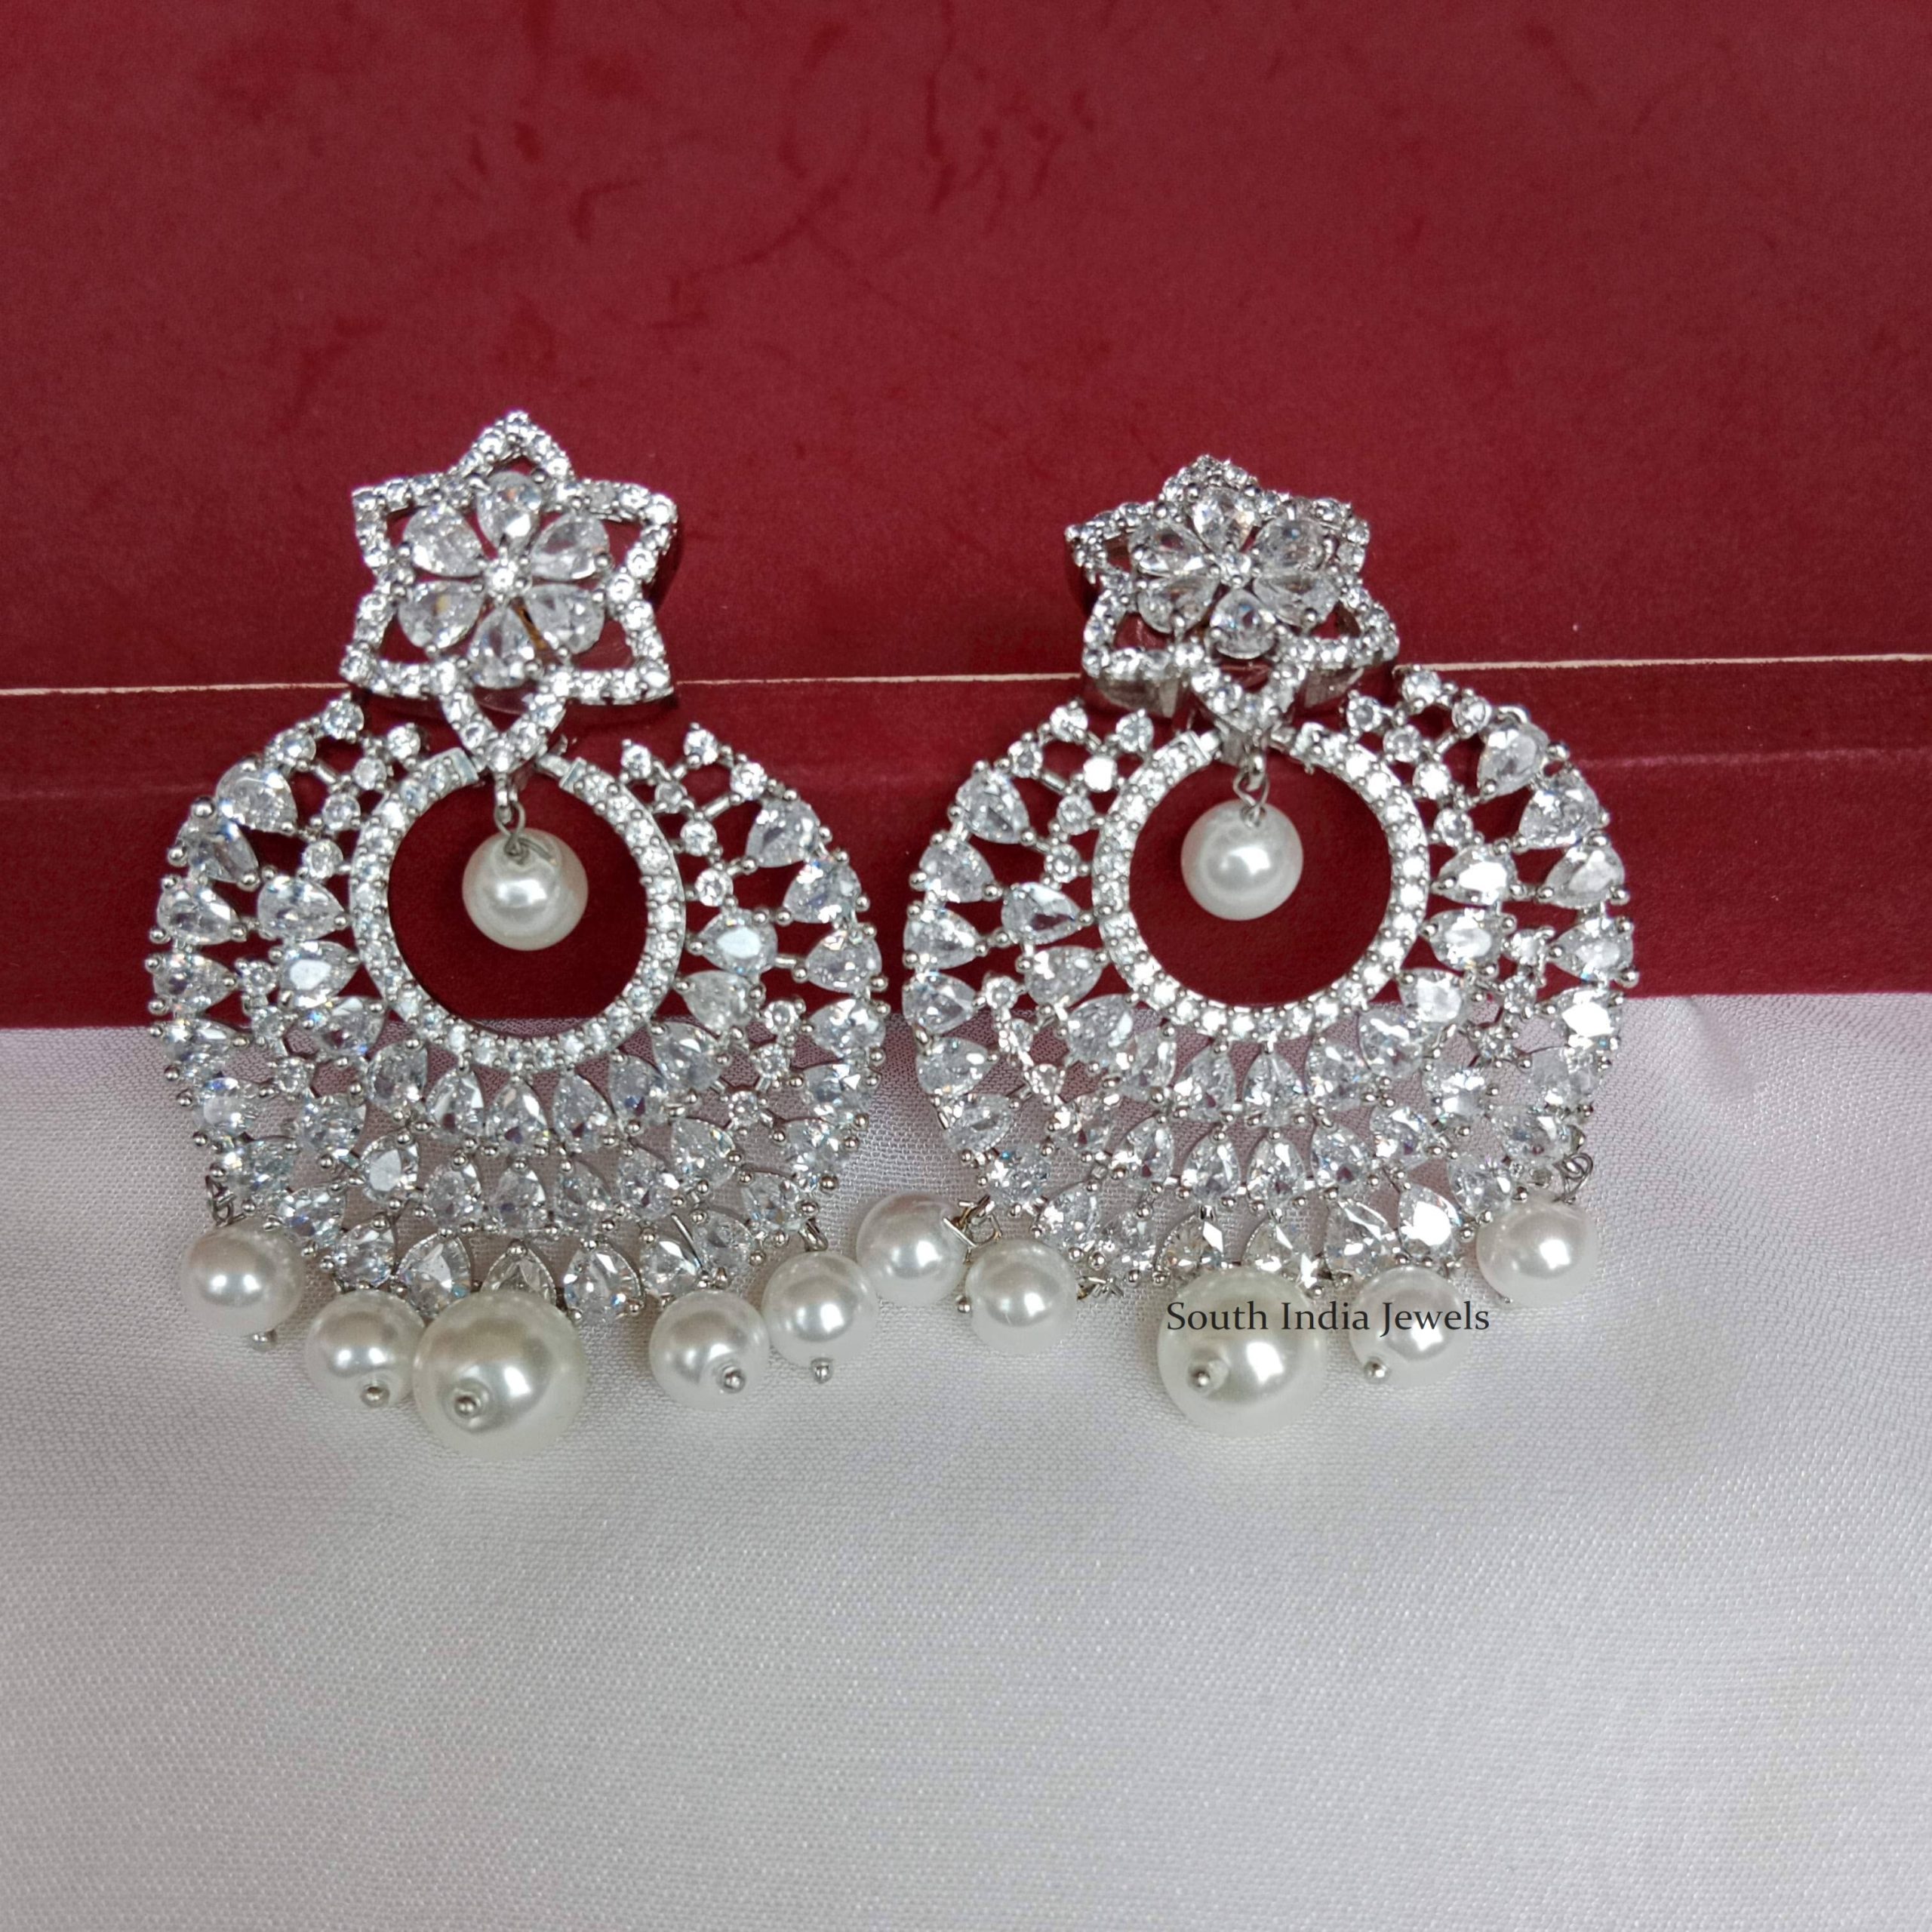 South India Jewels Online Store